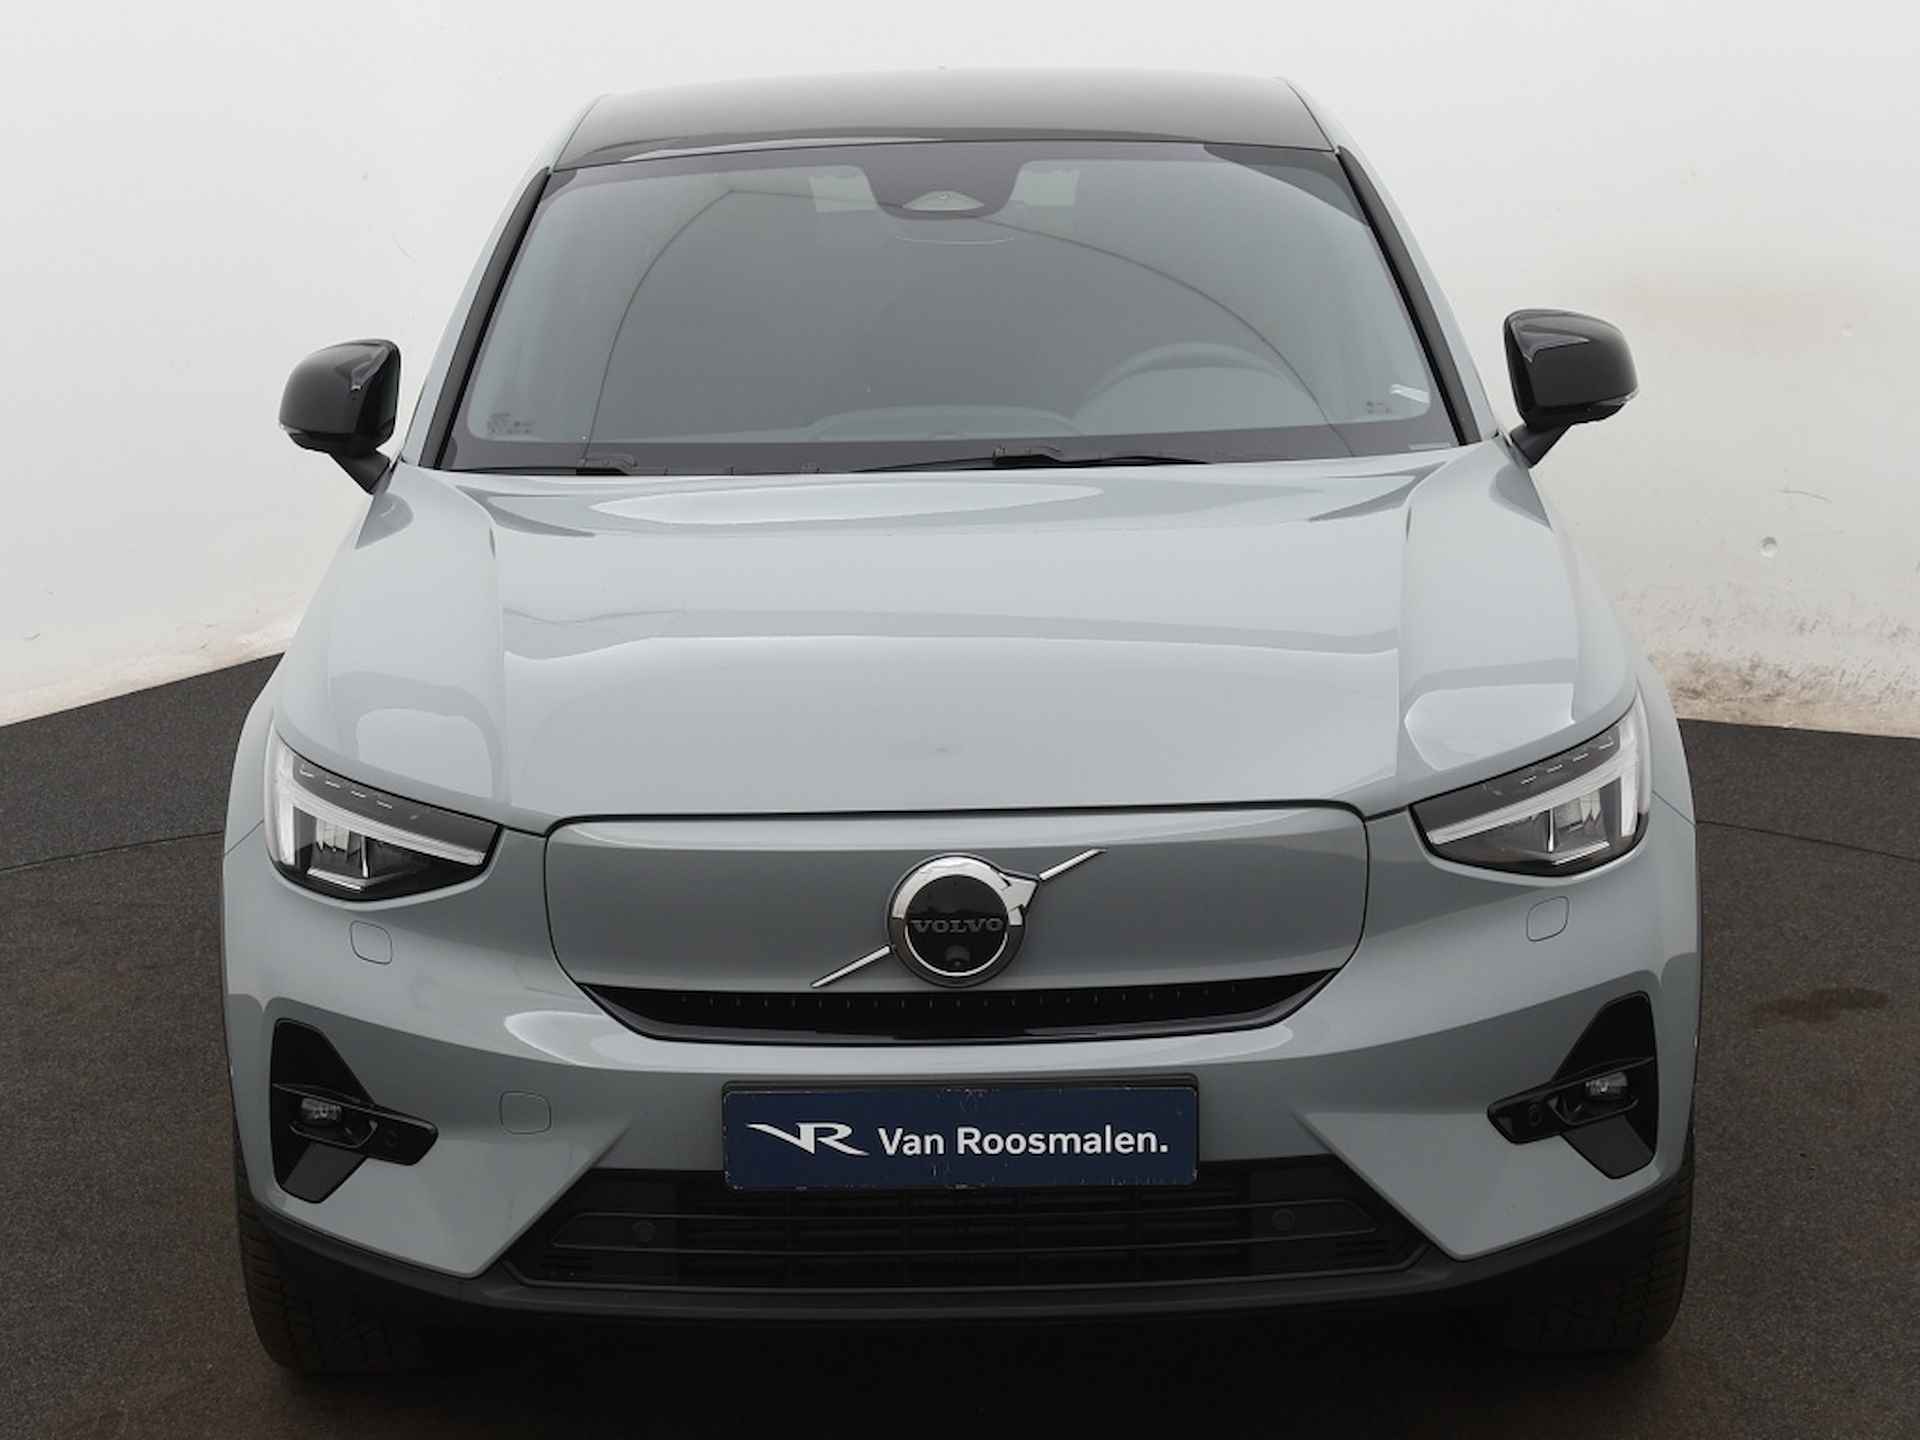 Volvo C40 Extended Ult 82 kWh - 8/43